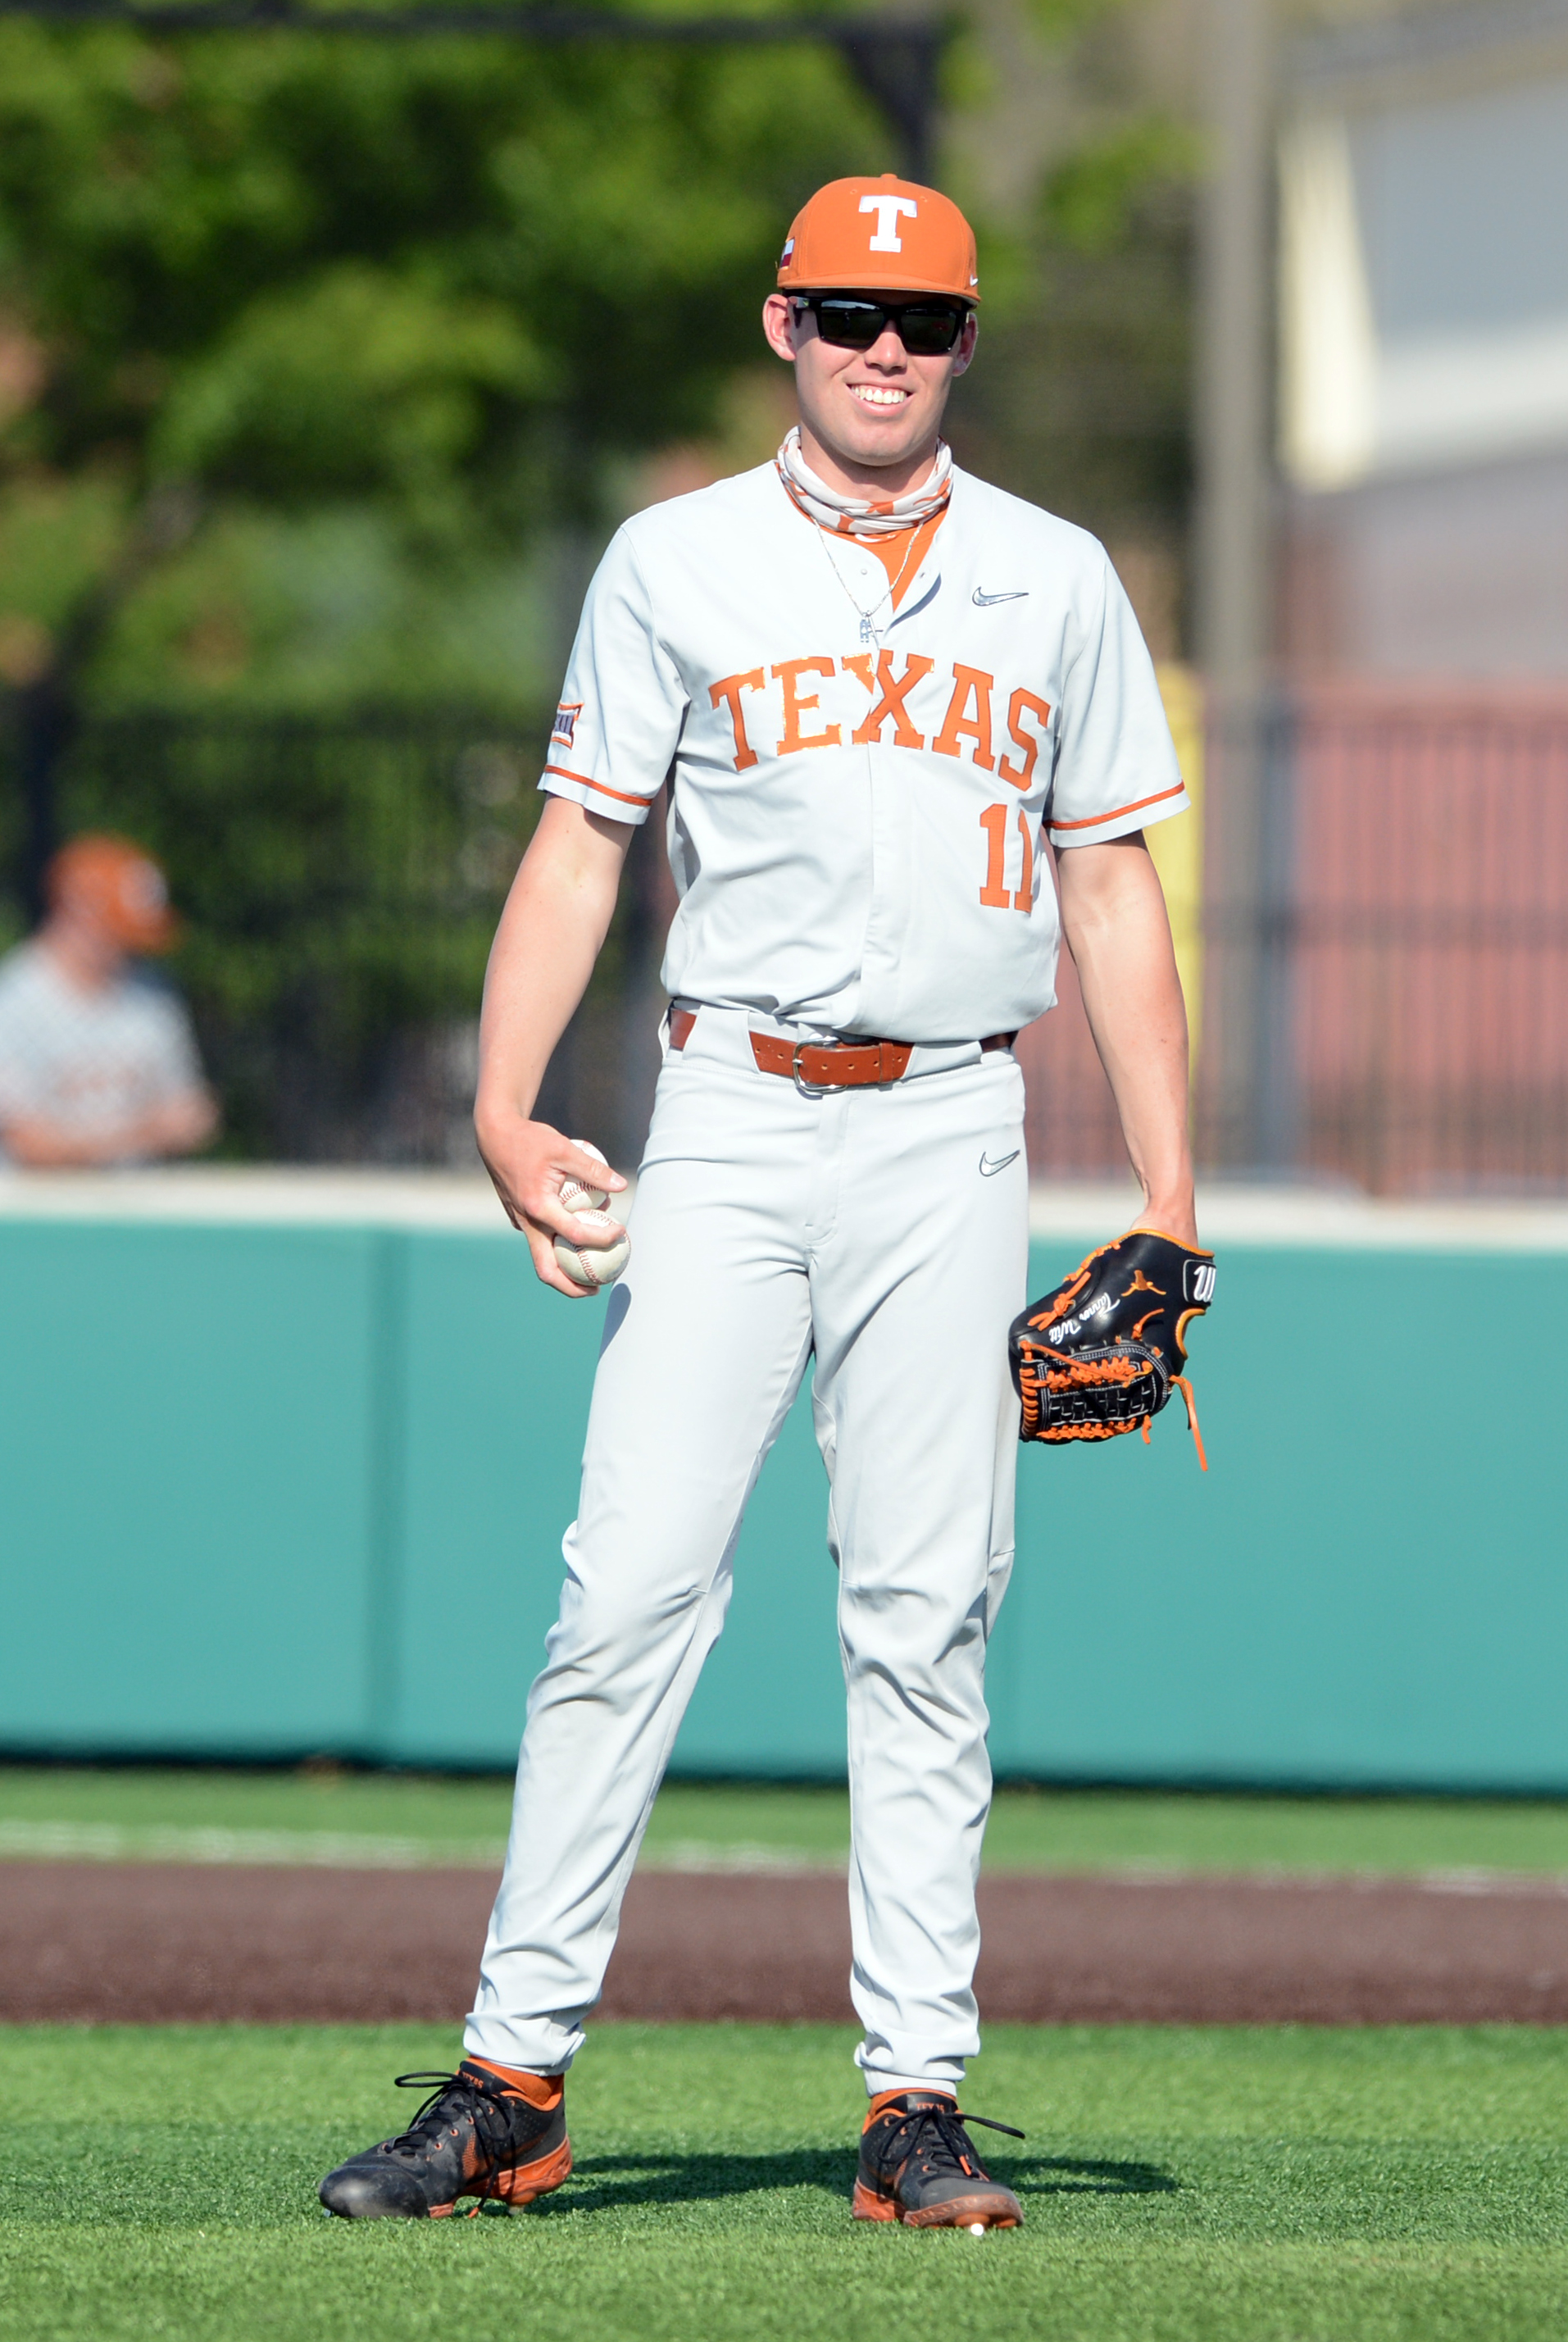 COLLEGE BASEBALL: APR 20 Texas at Texas State